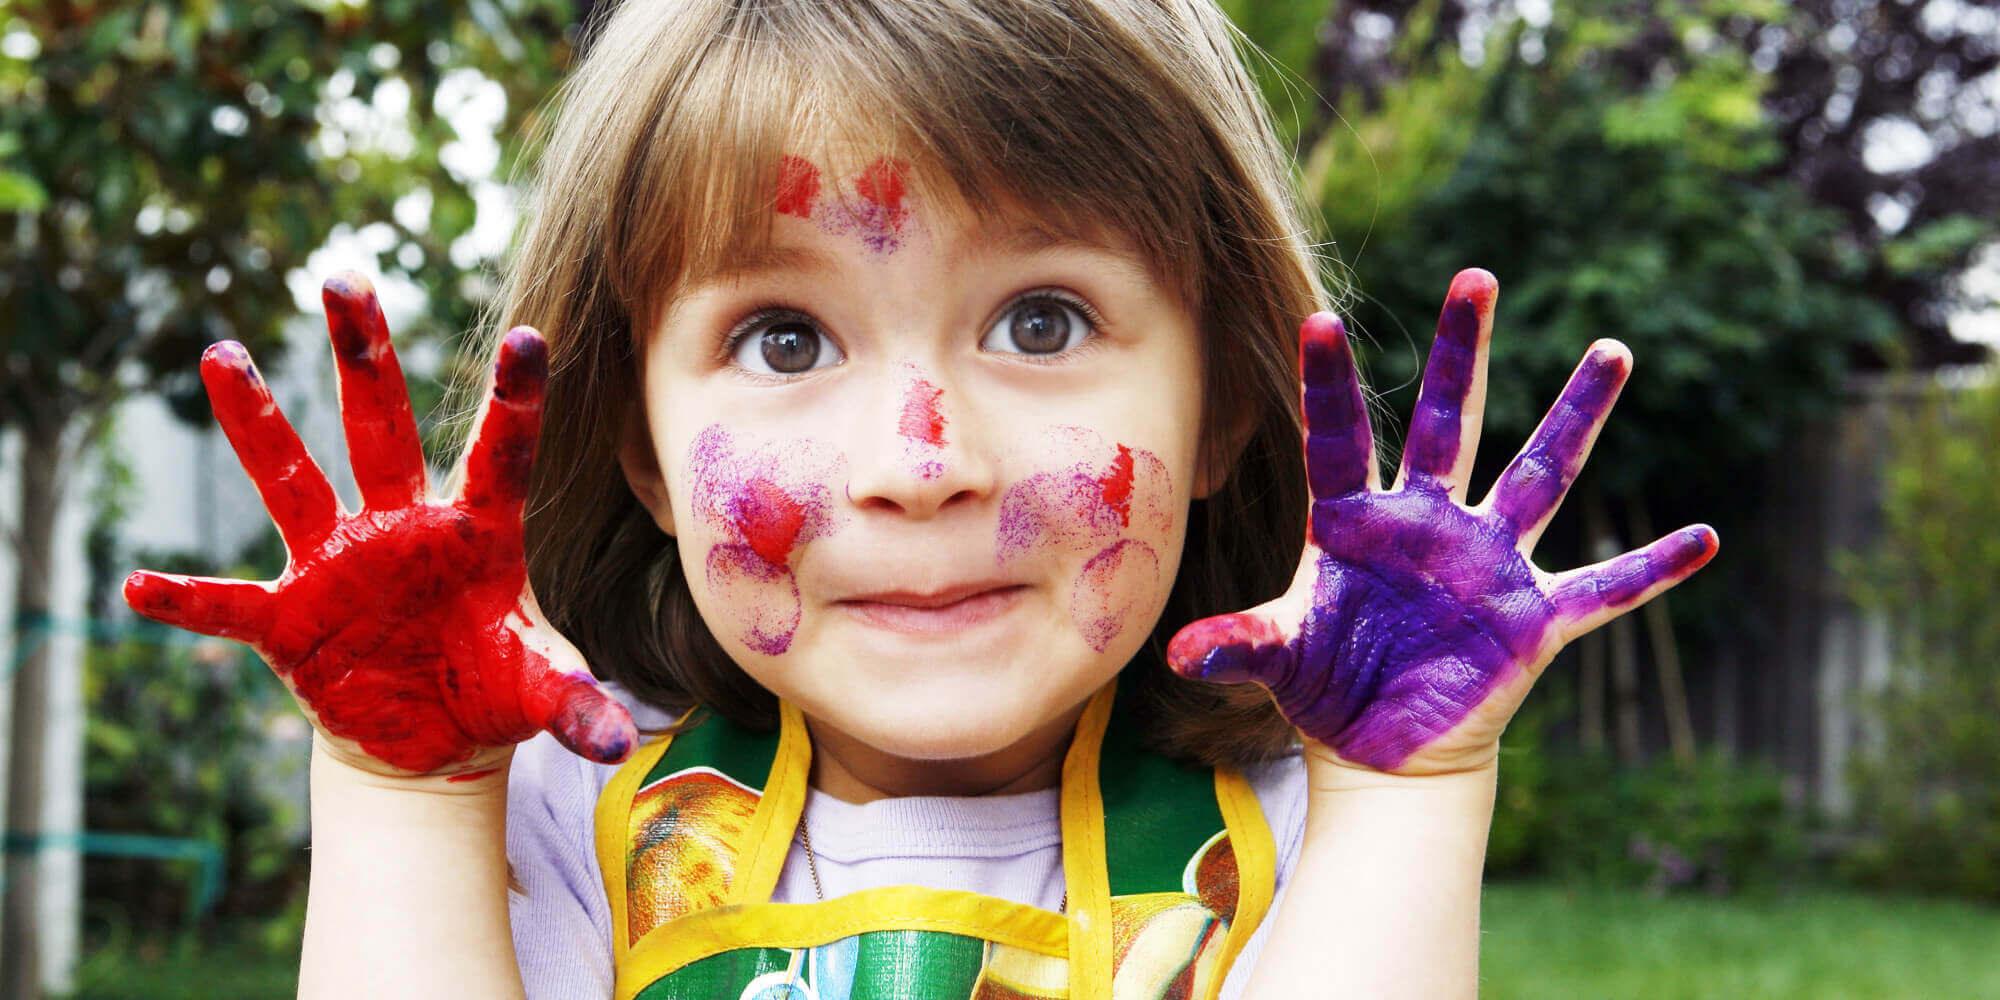 A little girl with finger paint on her hands and face.